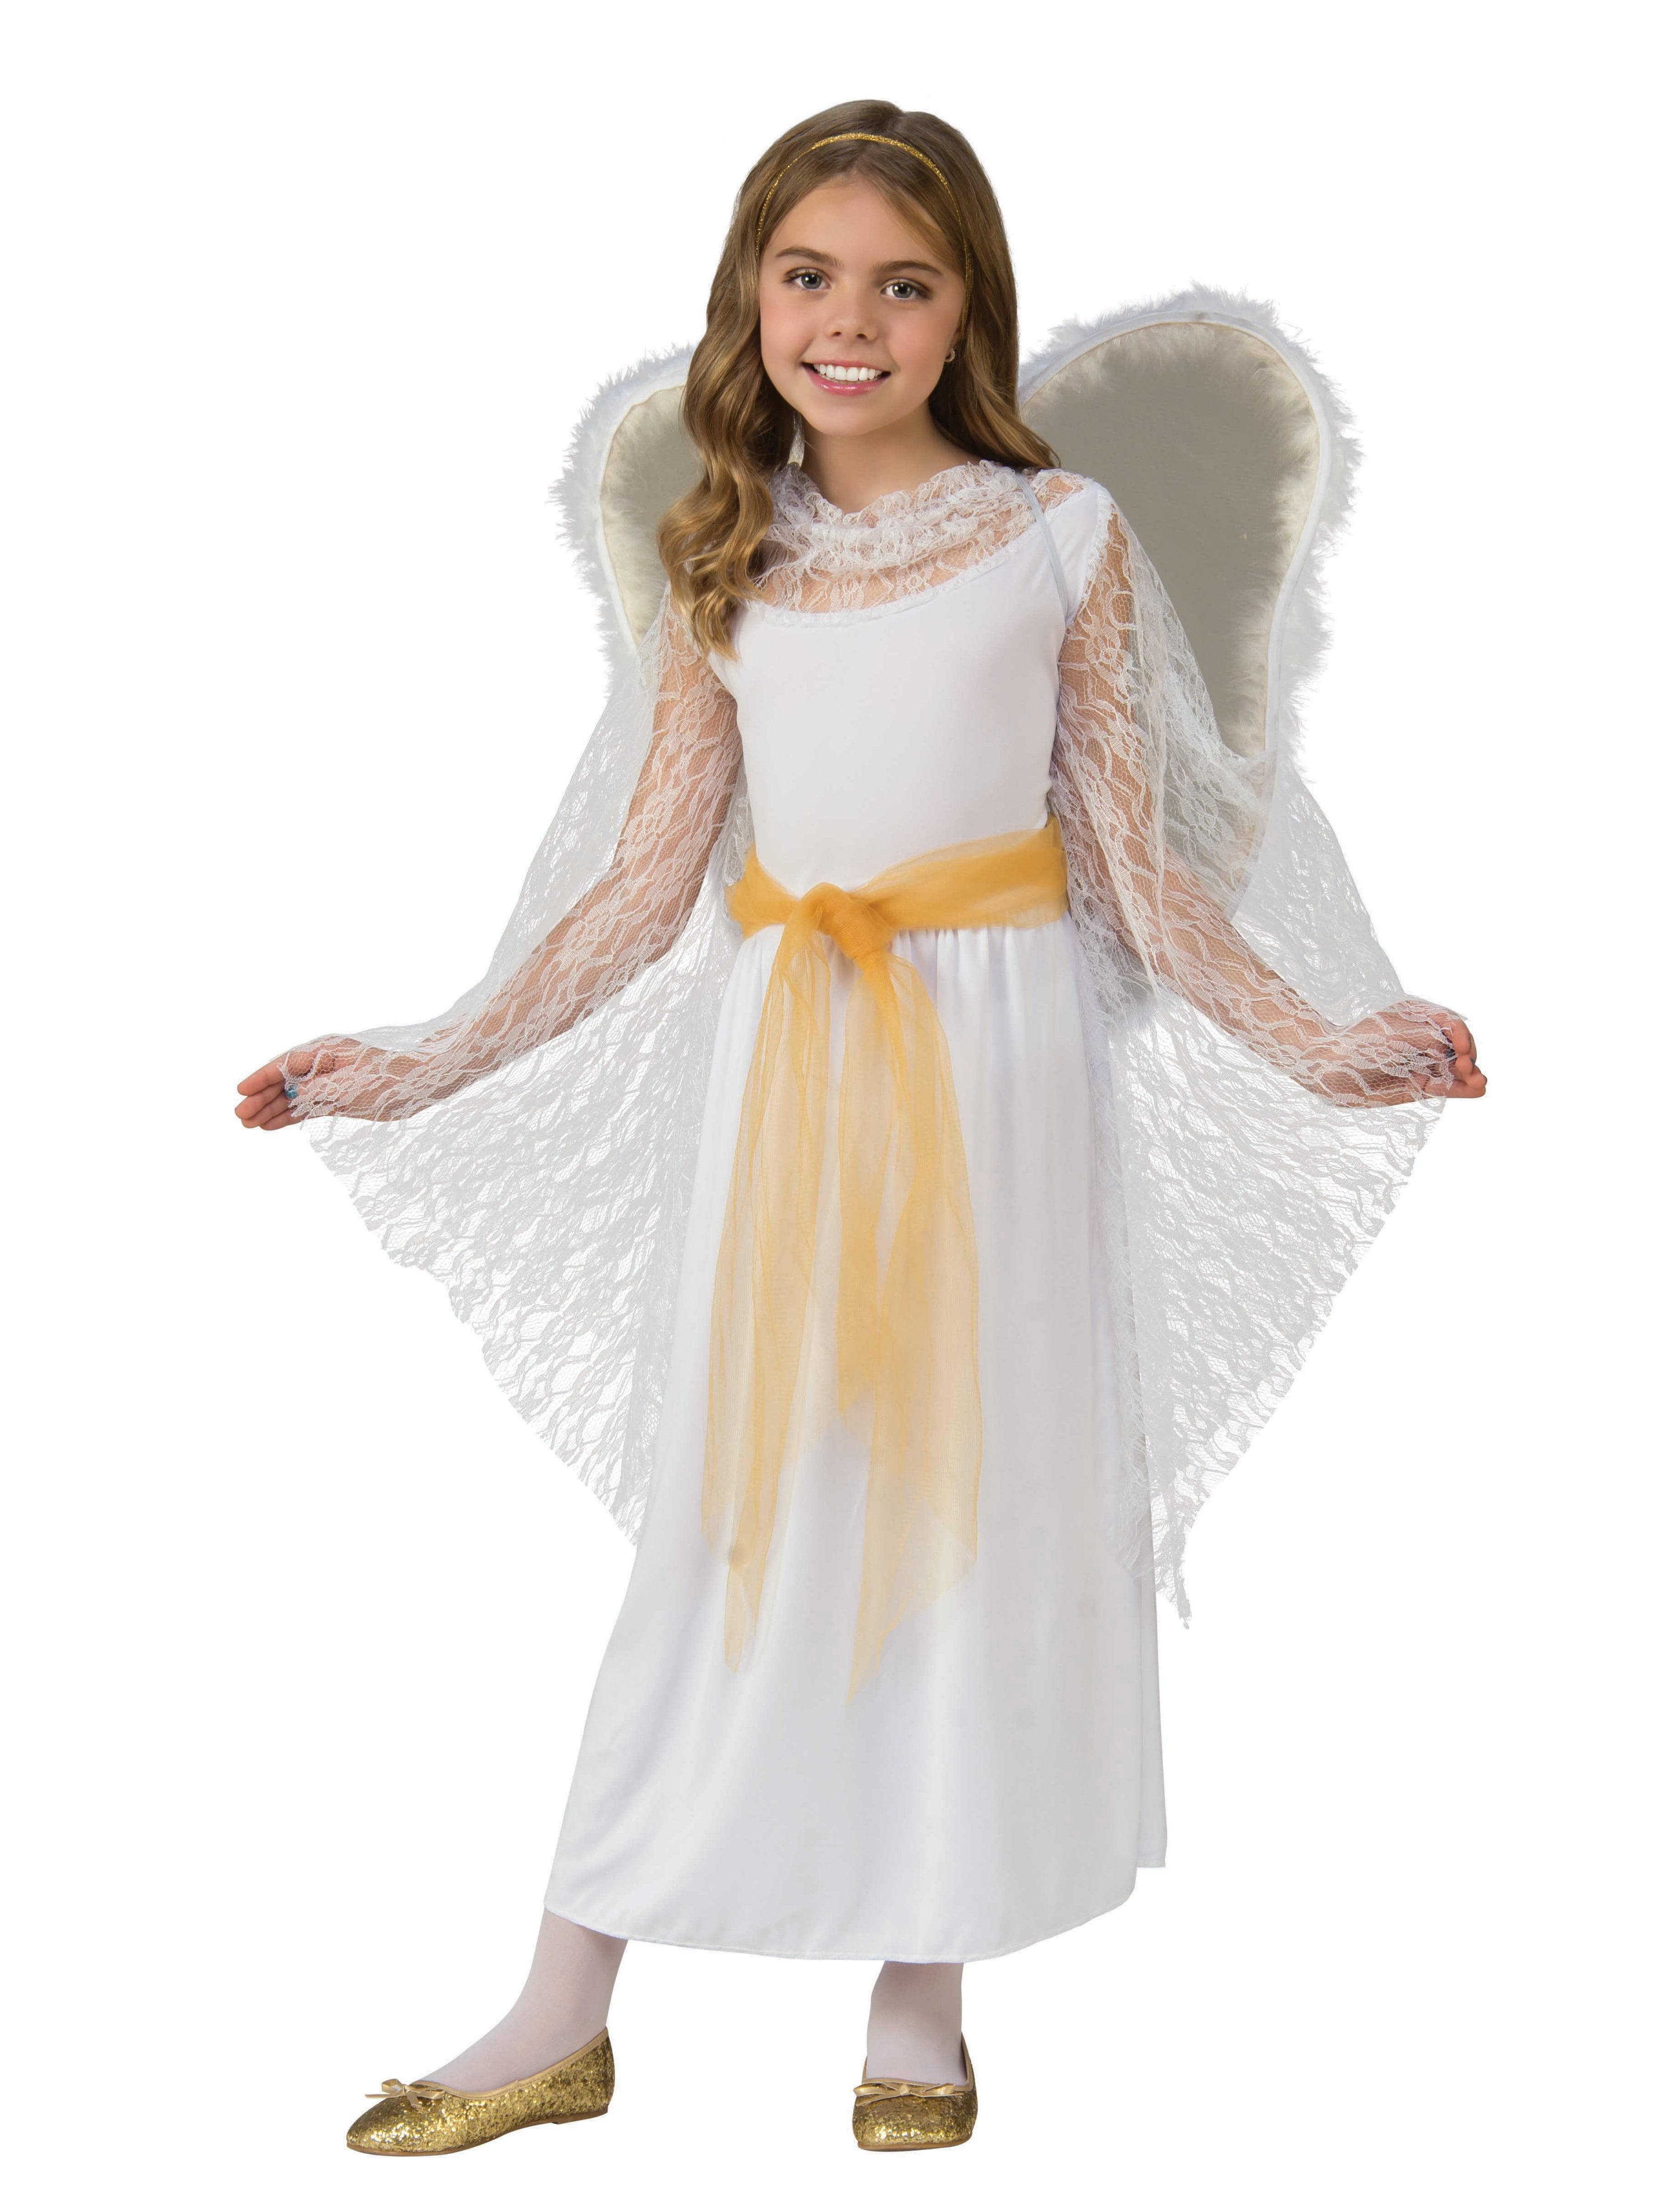 Kids Deluxe Lace Angel Costume - costumes.com